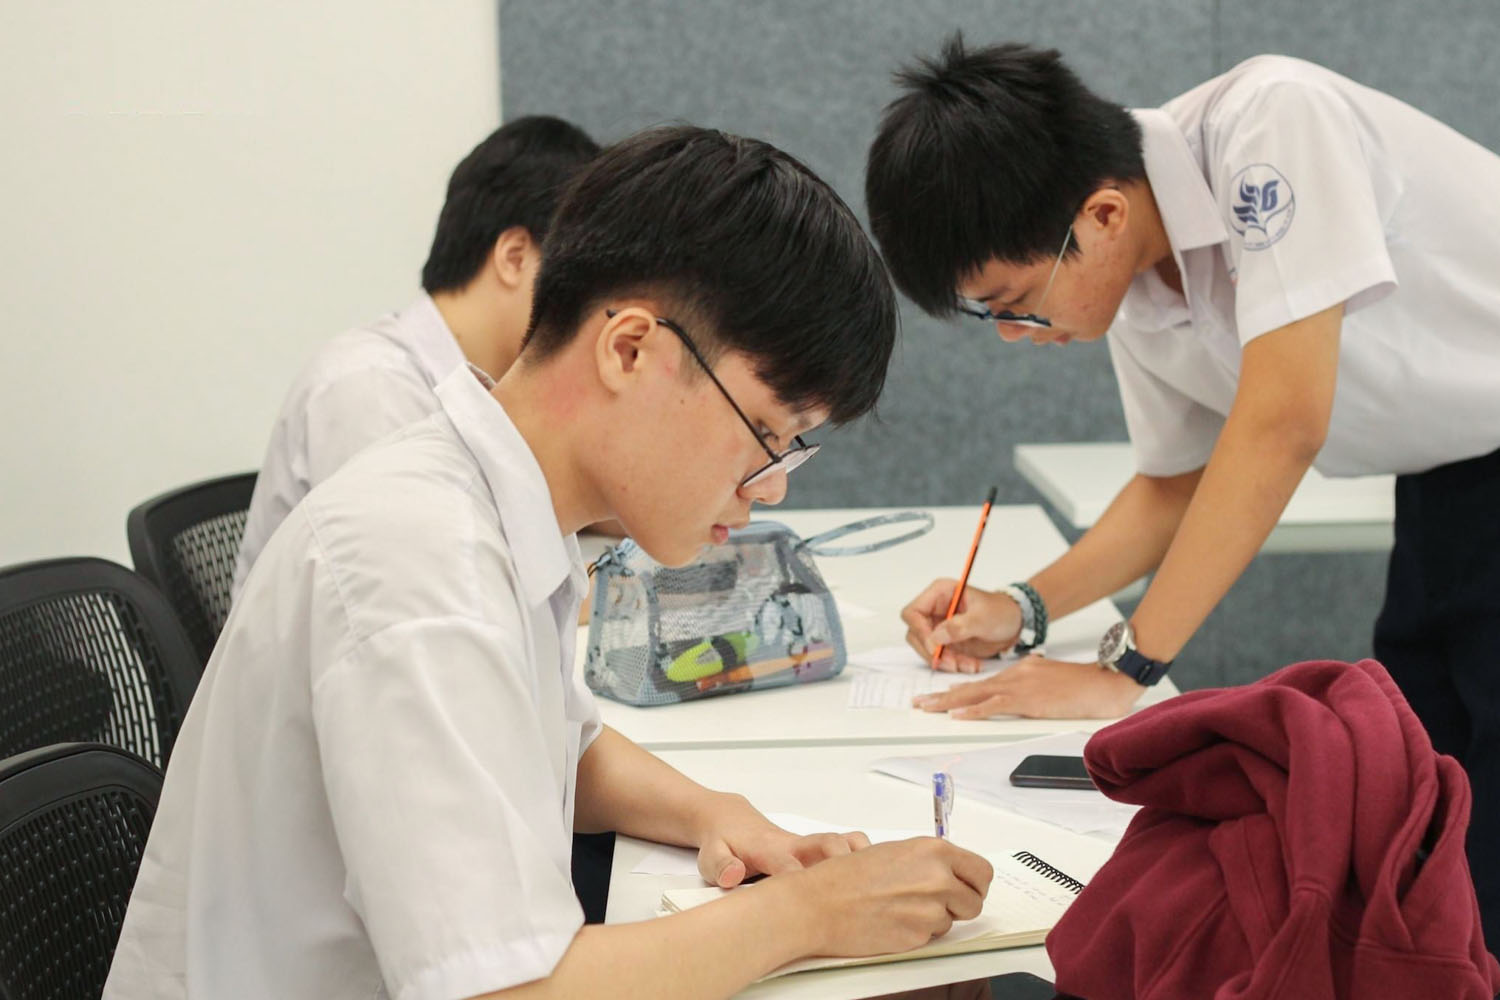 Thinh (pictured in the foreground) with his teammates during a debate tournament.